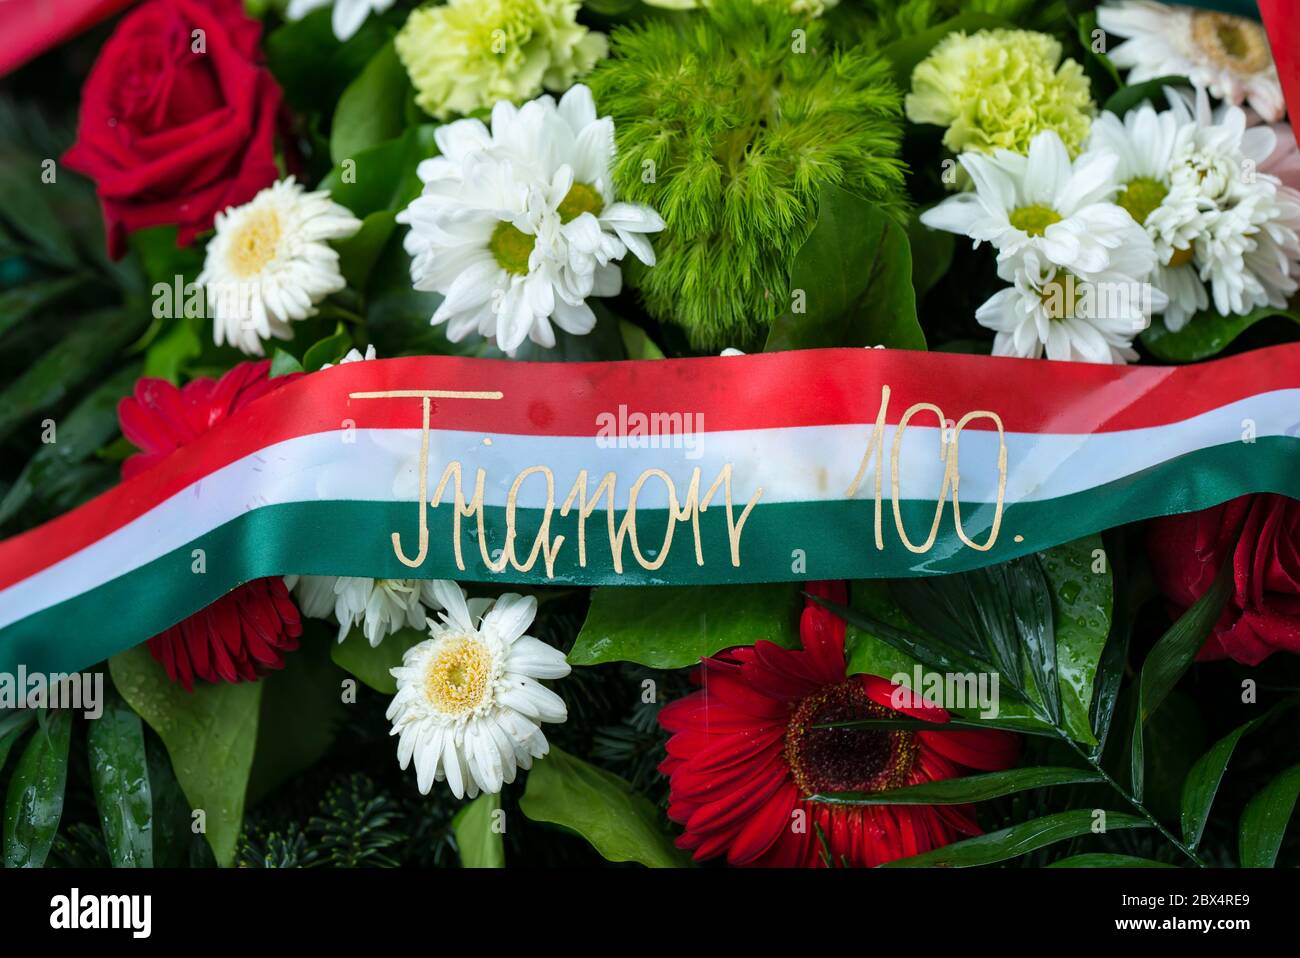 The 100th anniversary of the Treaty of Trianon in Hungary. Stock Photo